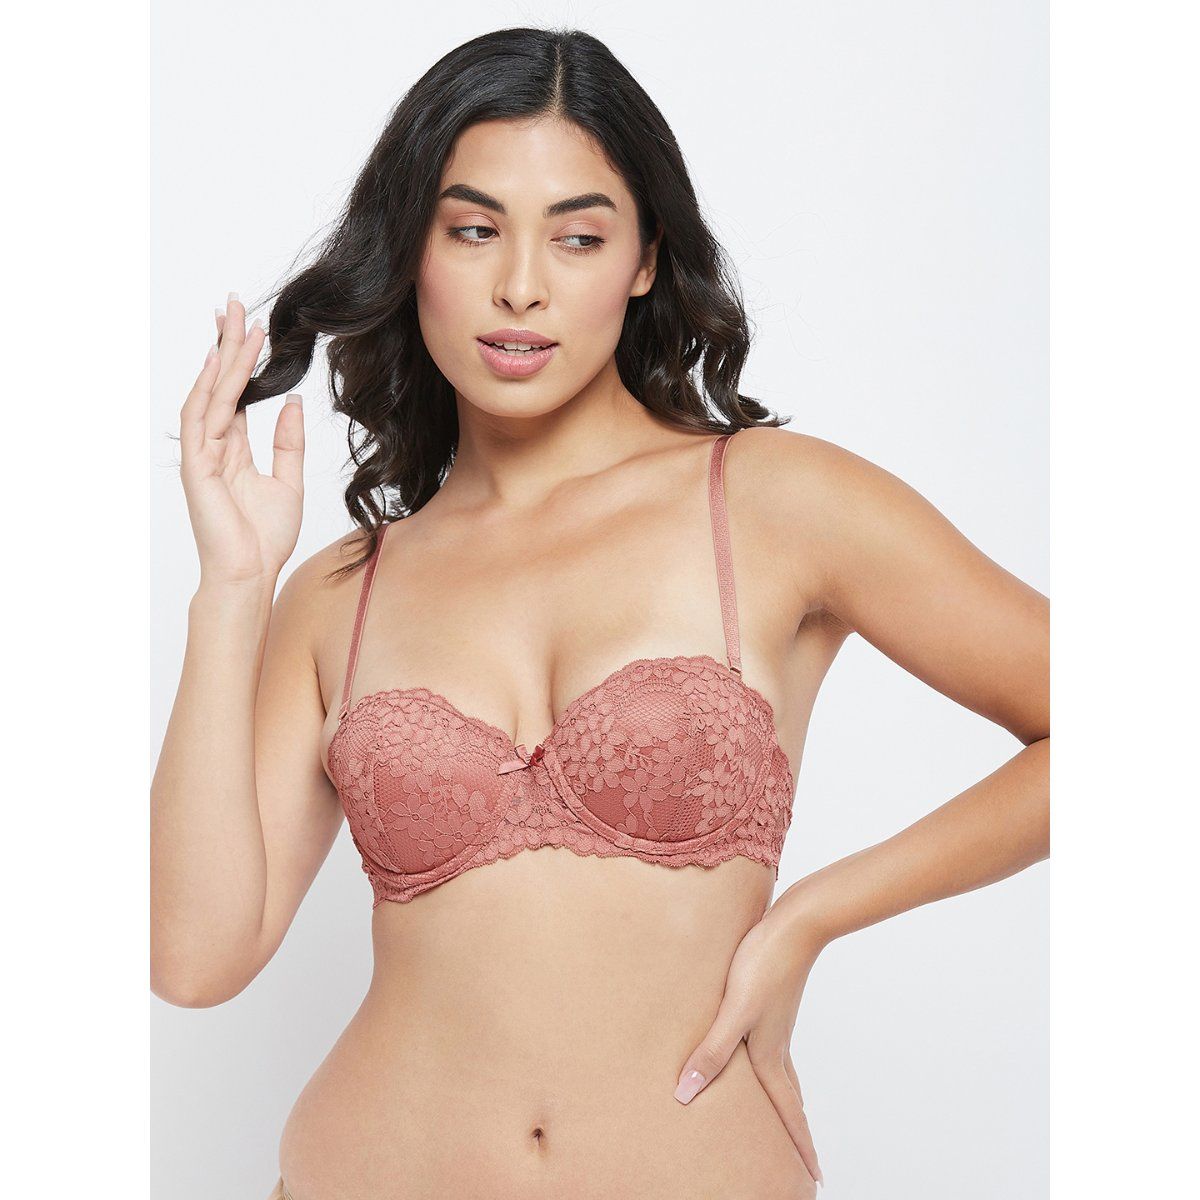 Clovia Women's Lace Padded Underwired Balconette Strapless Bra in Red